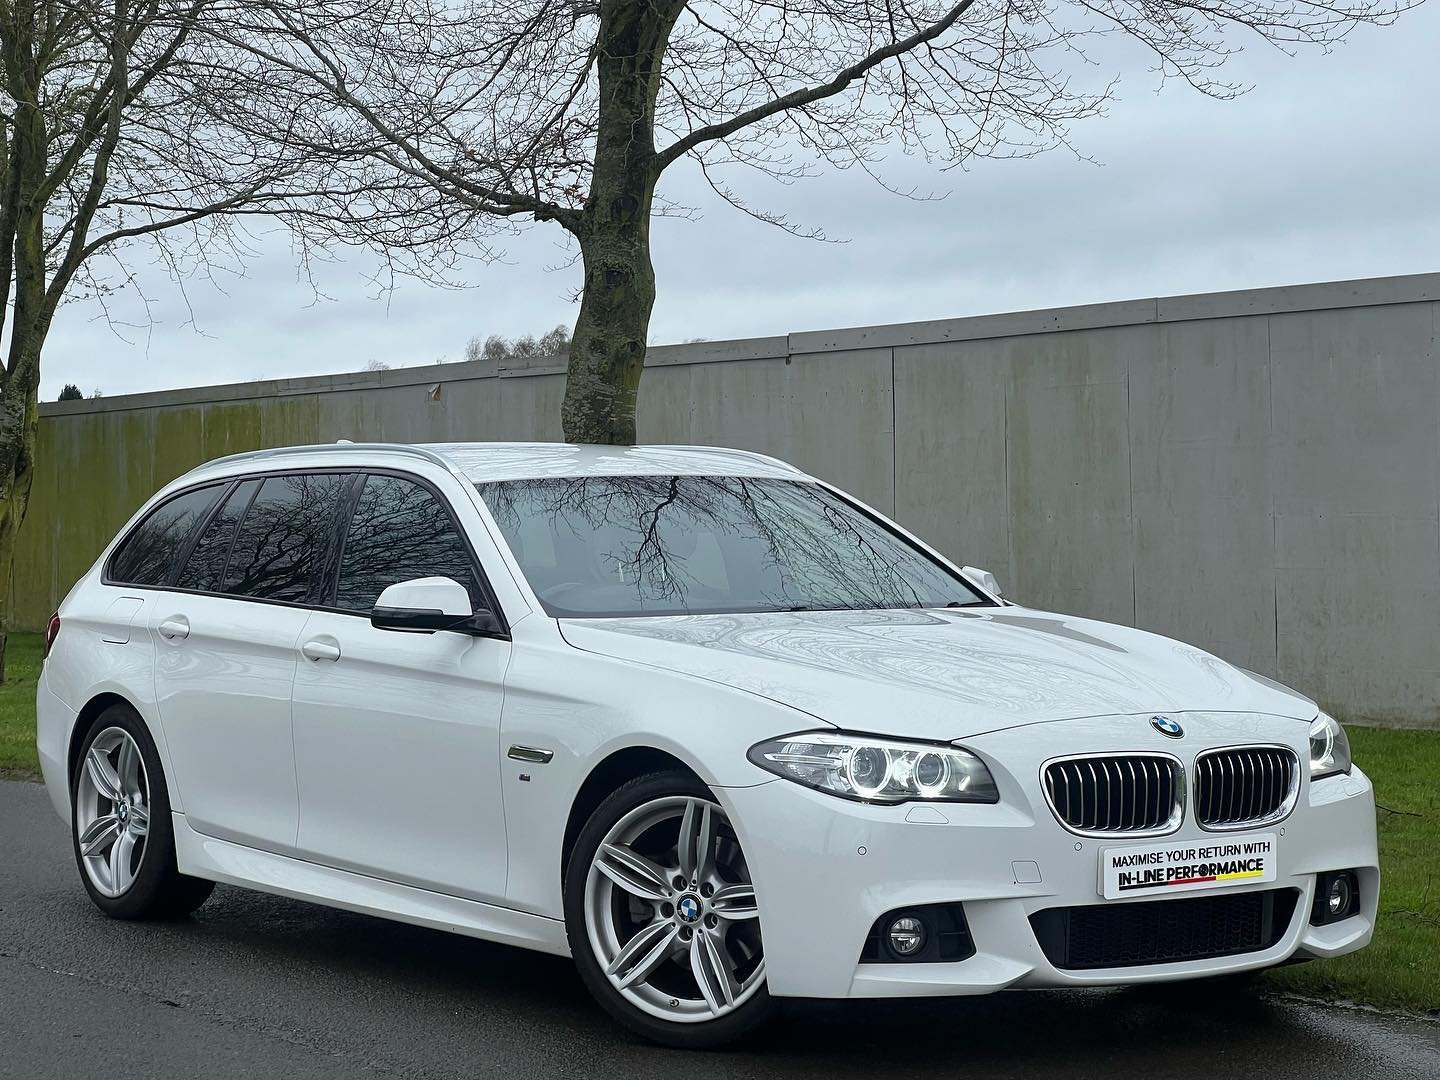 Here At IN-LINE PERFORMANCE We Take Pride And Joy Into Supplying You With Great Examples Of German Engineering. We Are Proud To Present This 2016 (66) BMW 520D Touring Finished In Alpine White. This Vehicle Is Fitted With Desirable Specification Whic